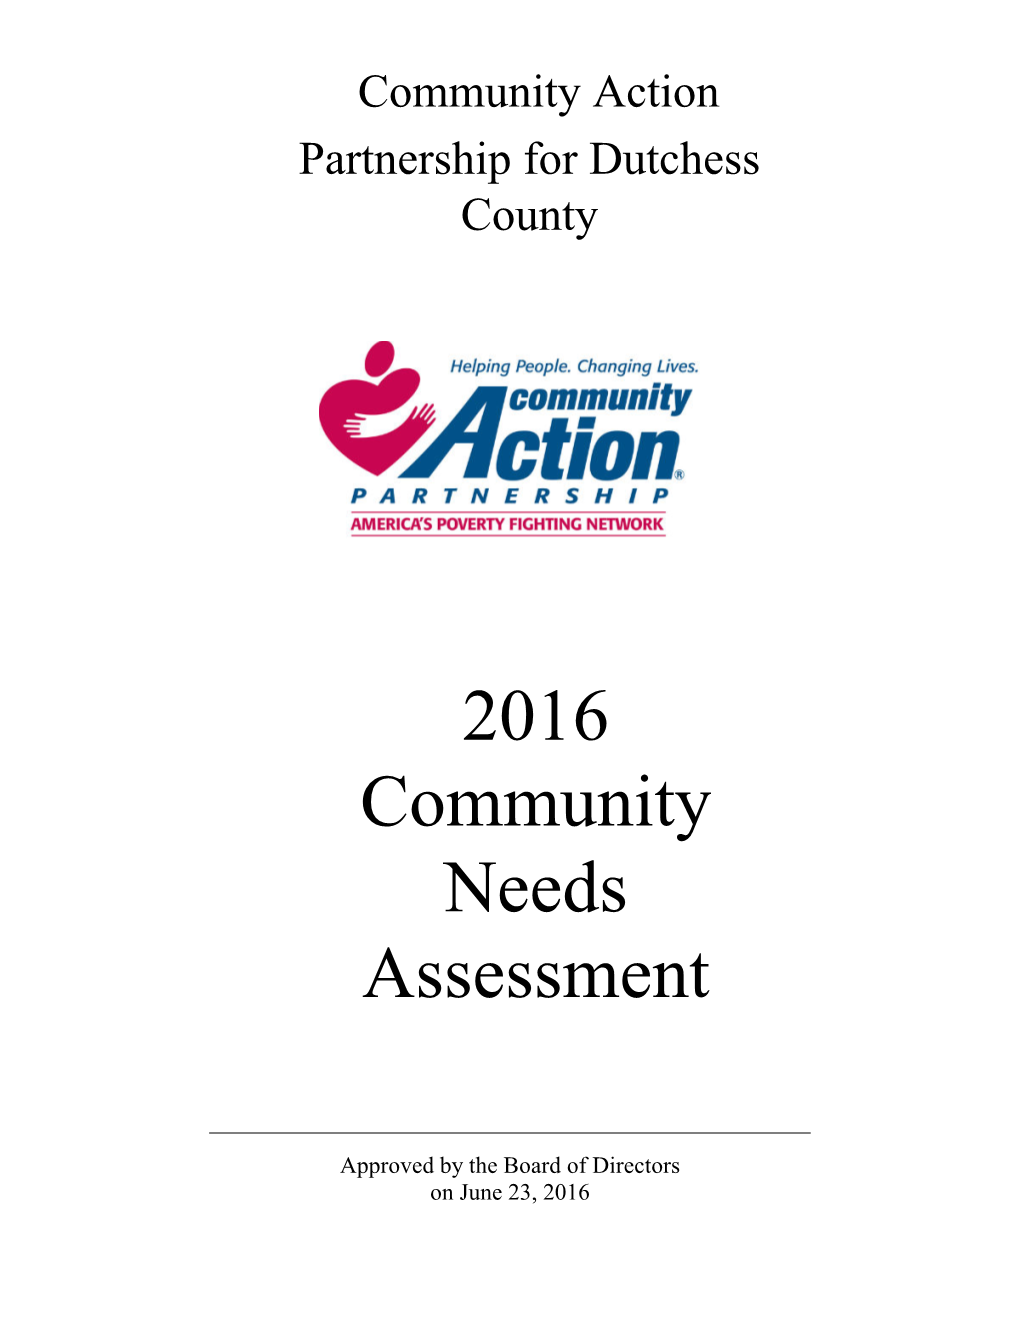 2016 Annual Community Needs Assessment